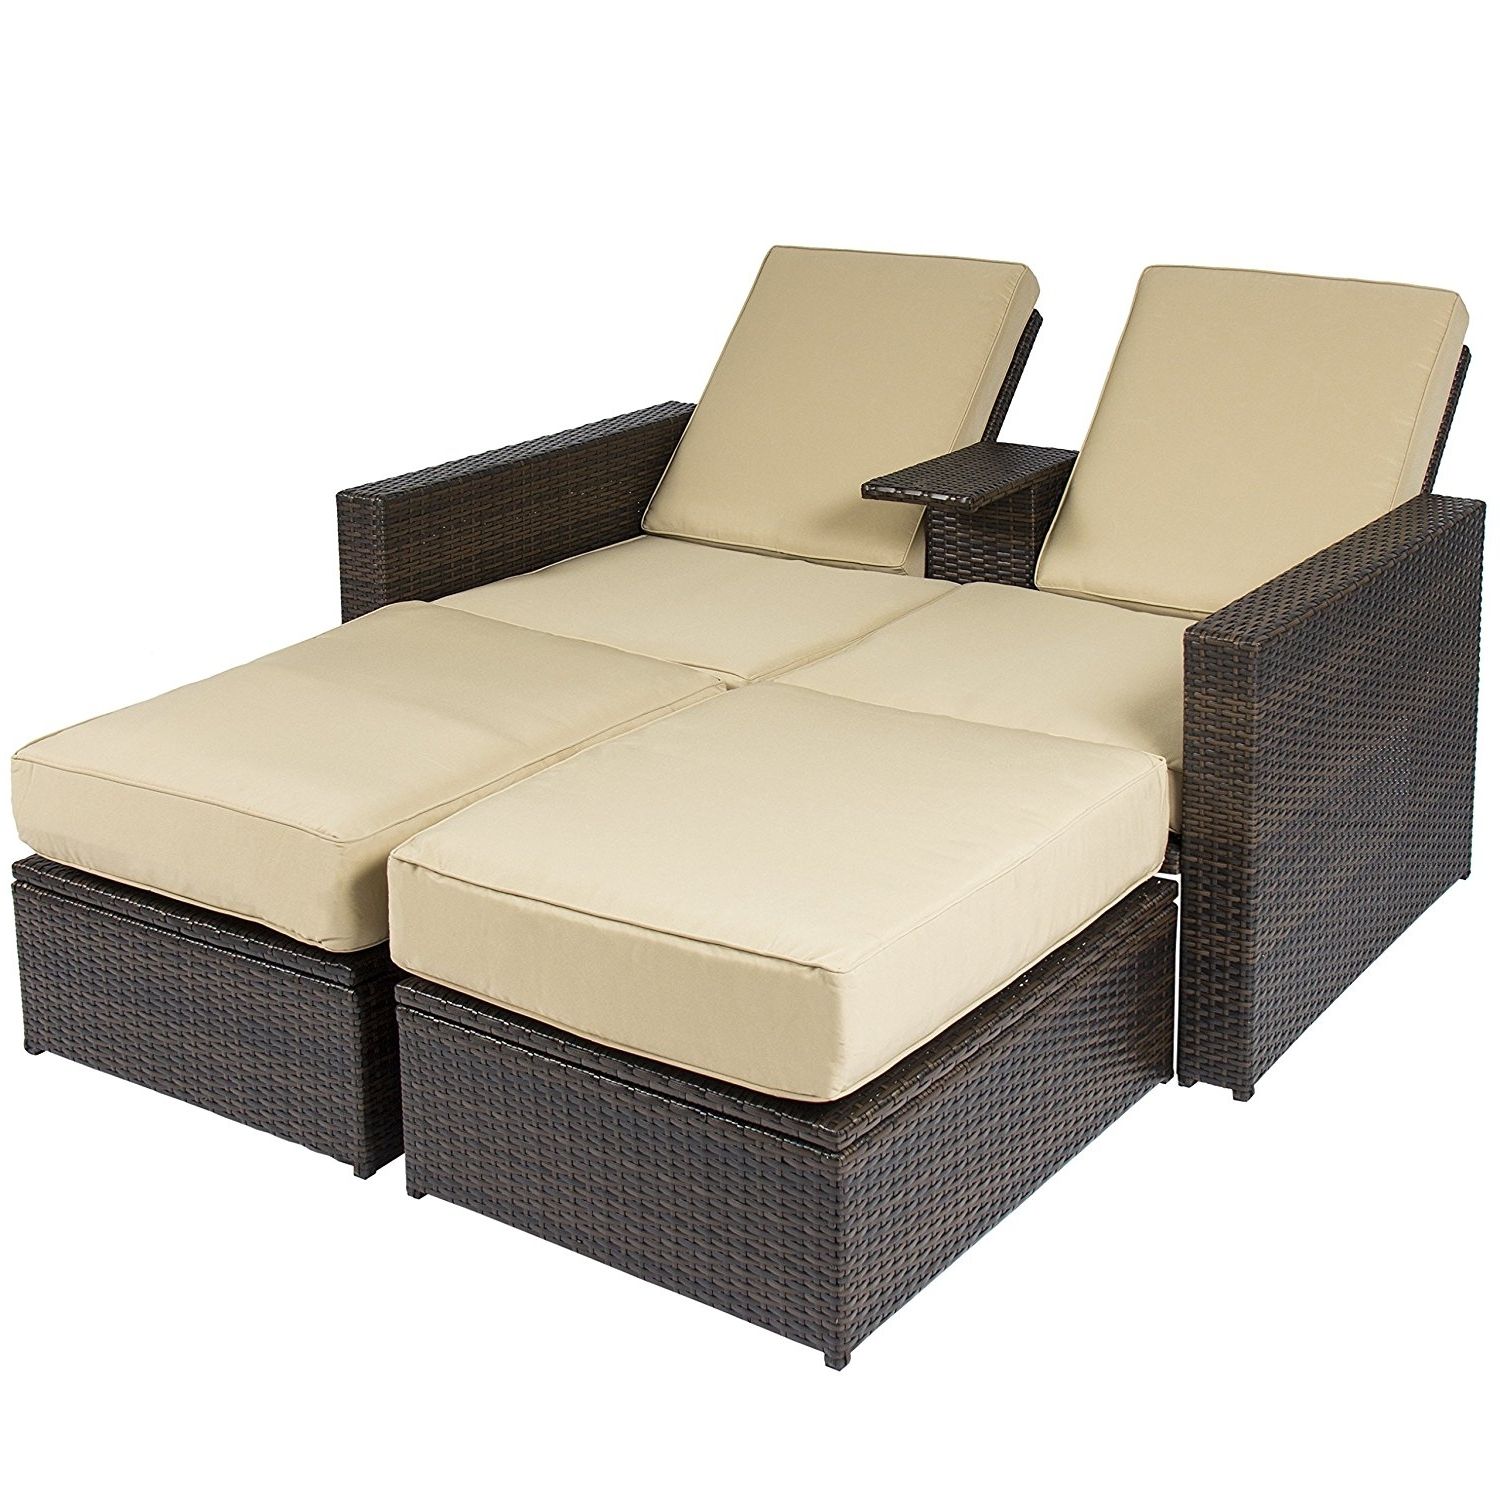 Preferred Amazon : Best Choice Products Outdoor 3pc Rattan Wicker Patio Throughout Dual Chaise Lounge Chairs (View 14 of 15)